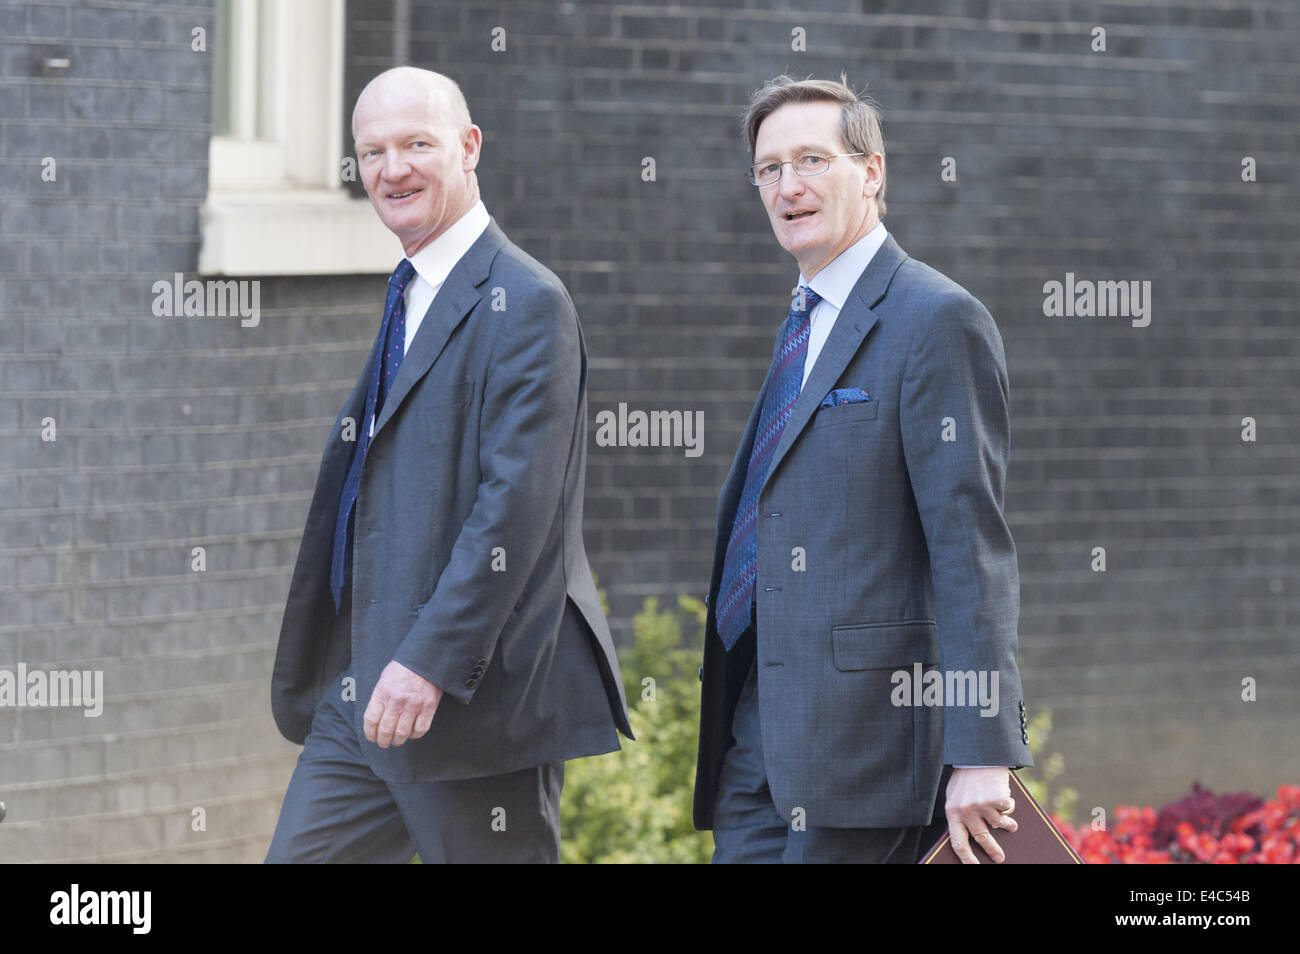 London, UK. 8th July, 2014. UK government ministers attend 10 Downing Street in London for the weekly Cabinet Meeting. Pictured L-R: DAVID WILLETTS MP - .Minister of State for Universities and Science; Dominic Grieve QC MP -.Attorney General. © Lee Thomas/ZUMA Wire/Alamy Live News Stock Photo